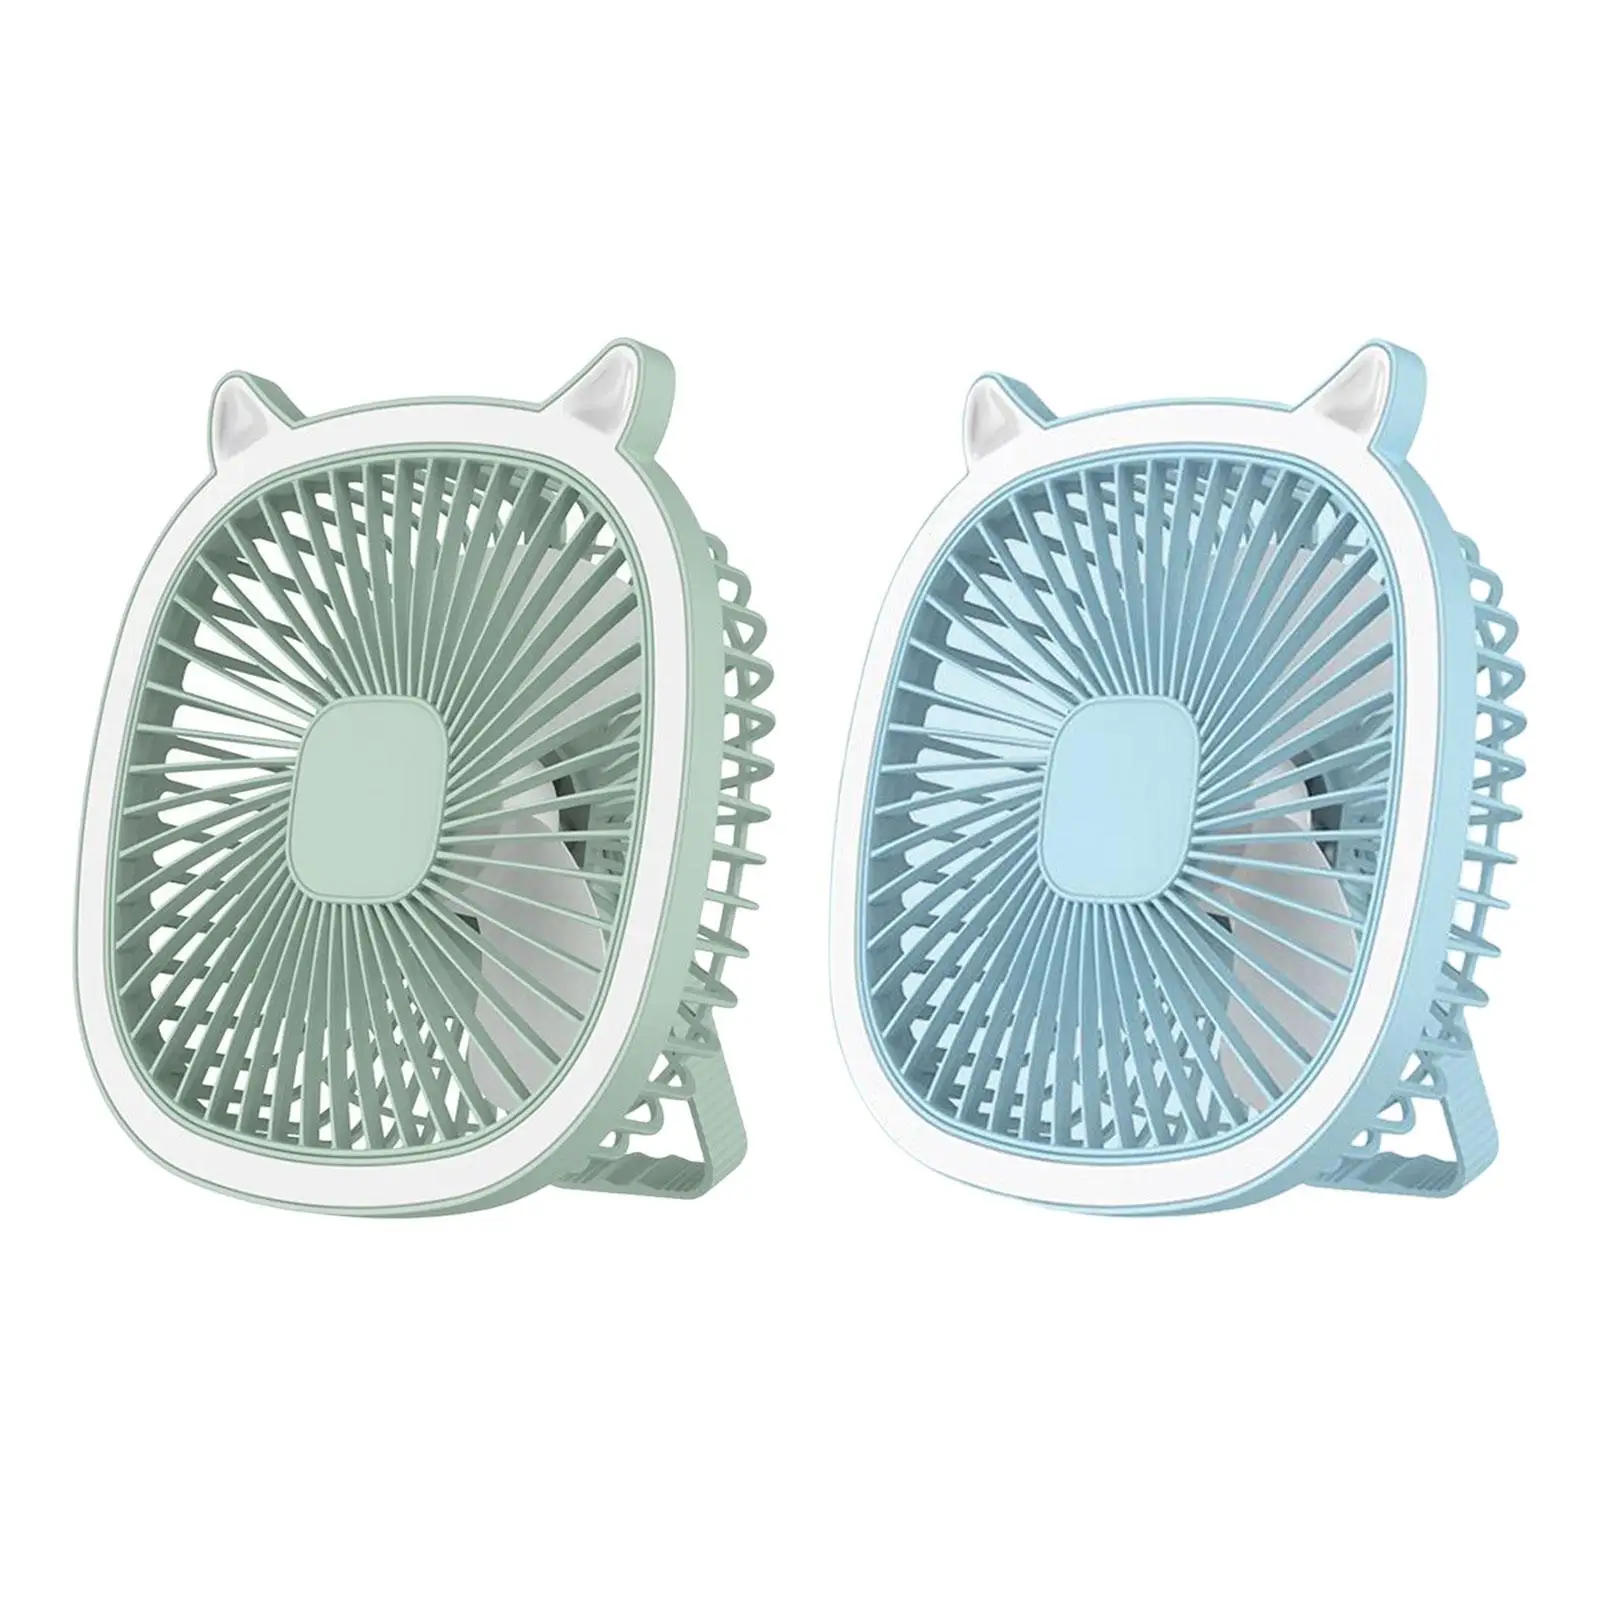 Compact Desk Fan Personal Table Cooling Fan Quiet USB Rechargeable with Lights with Hook Portable for Camping Car Home Office